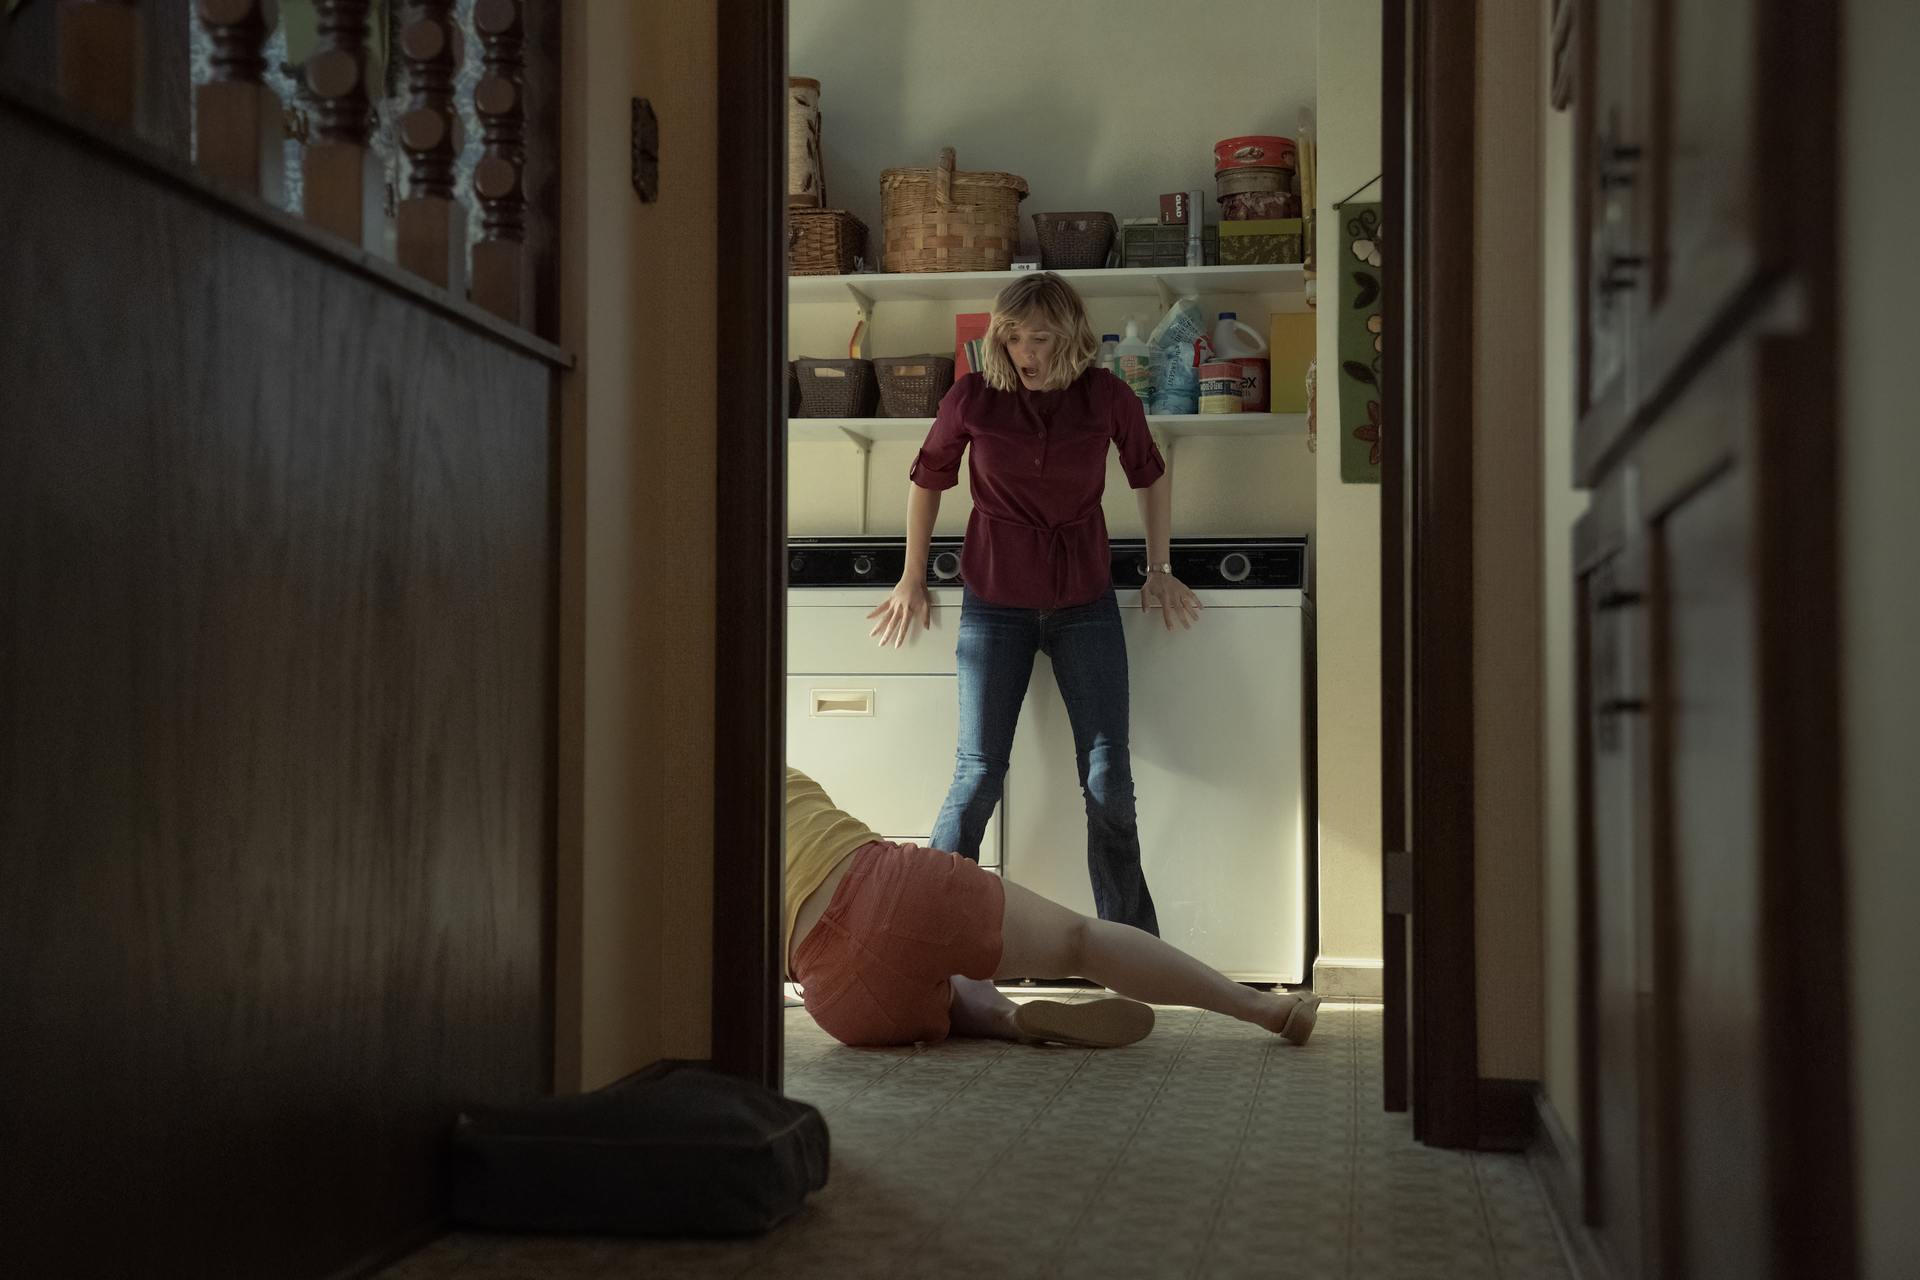 Candy (Elizabeth Olson) looks startled at Betty (Lily Rabe) on the ground, as shot through a doorway, in a still from Love &amp; Death on HBO